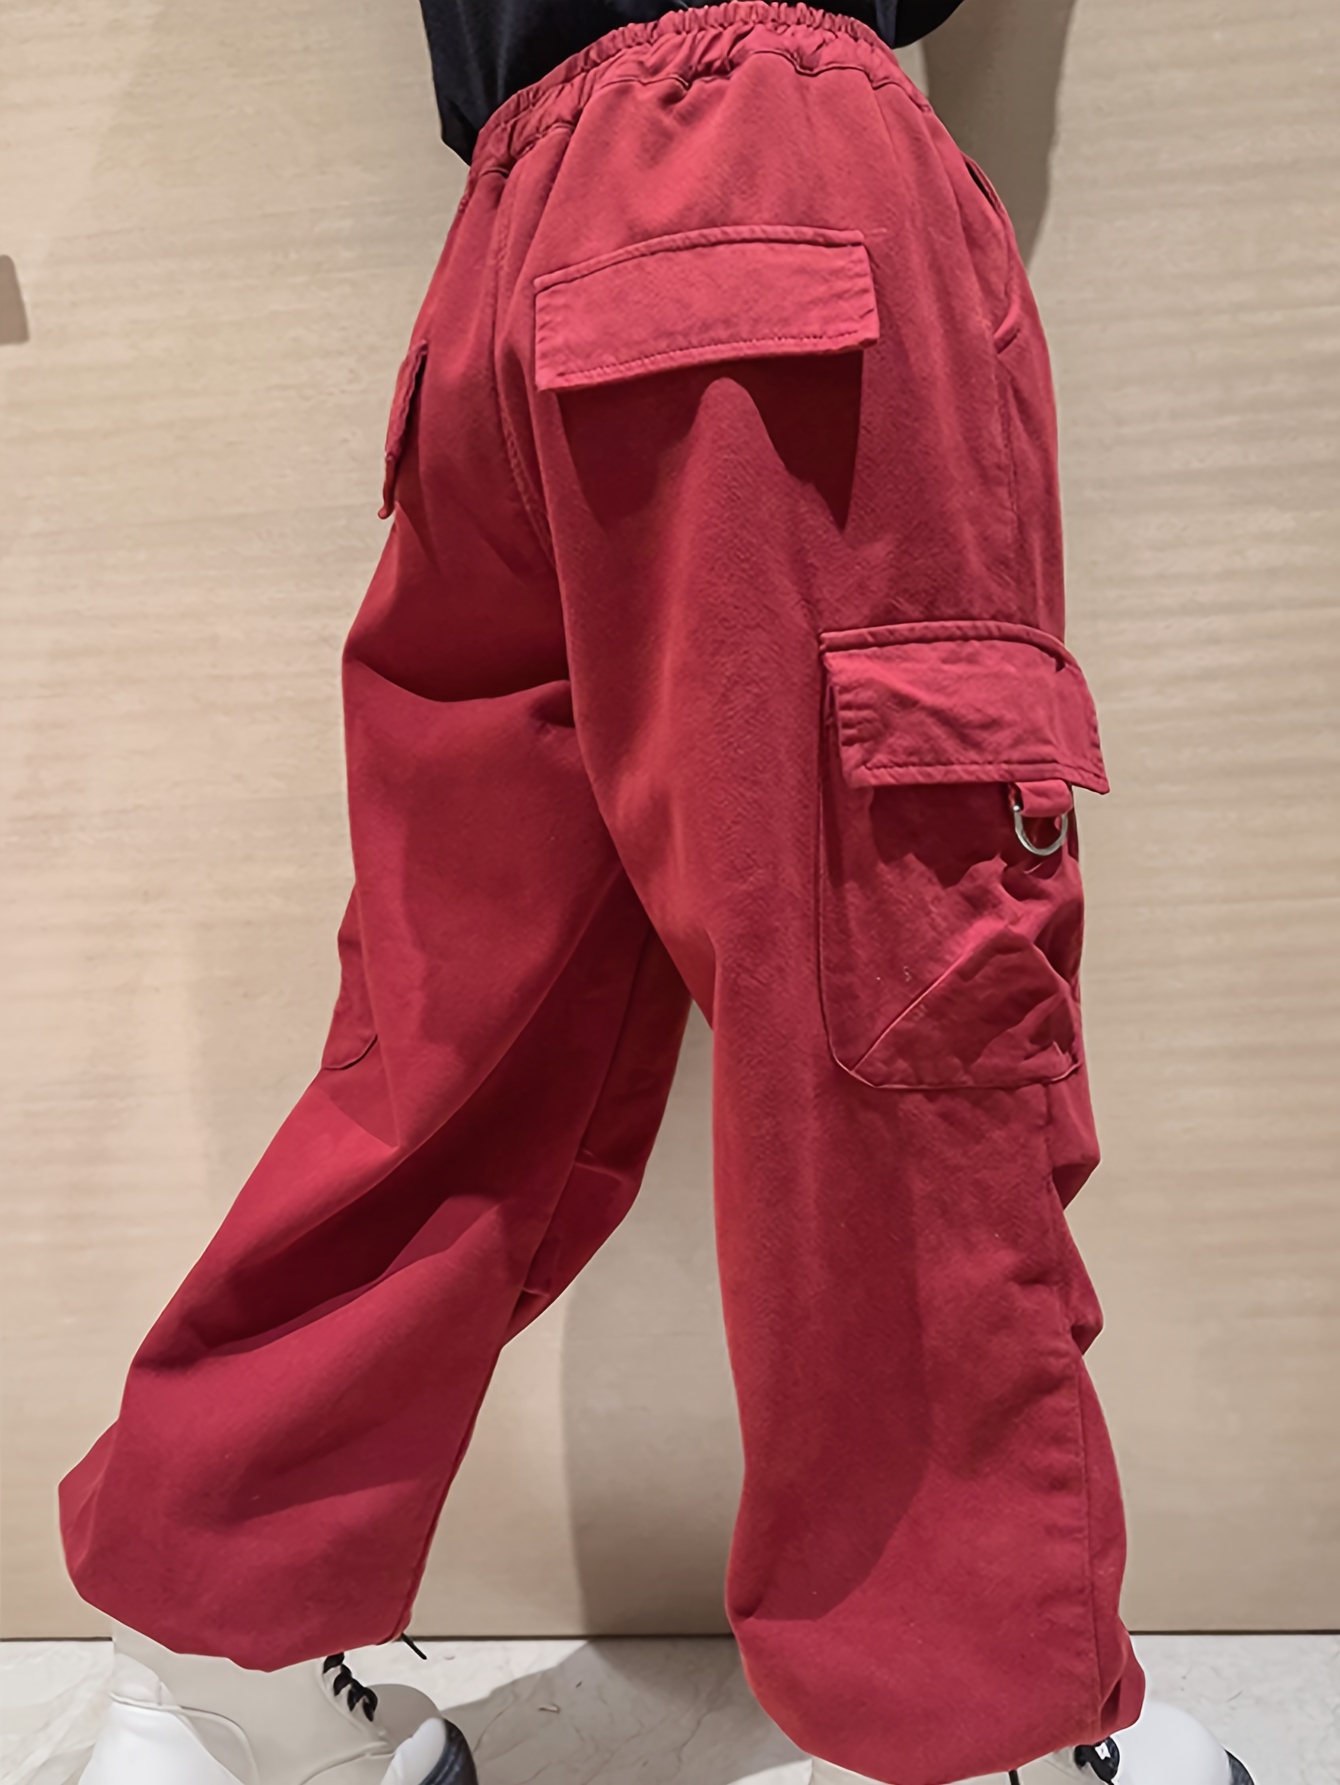 Girls Casual Warm Sports Cargo Trousers With Fleece Lining & Loose Fit,  Casual Wide Leg Pants For Streetwear/ Dance/ K-pop Outfit